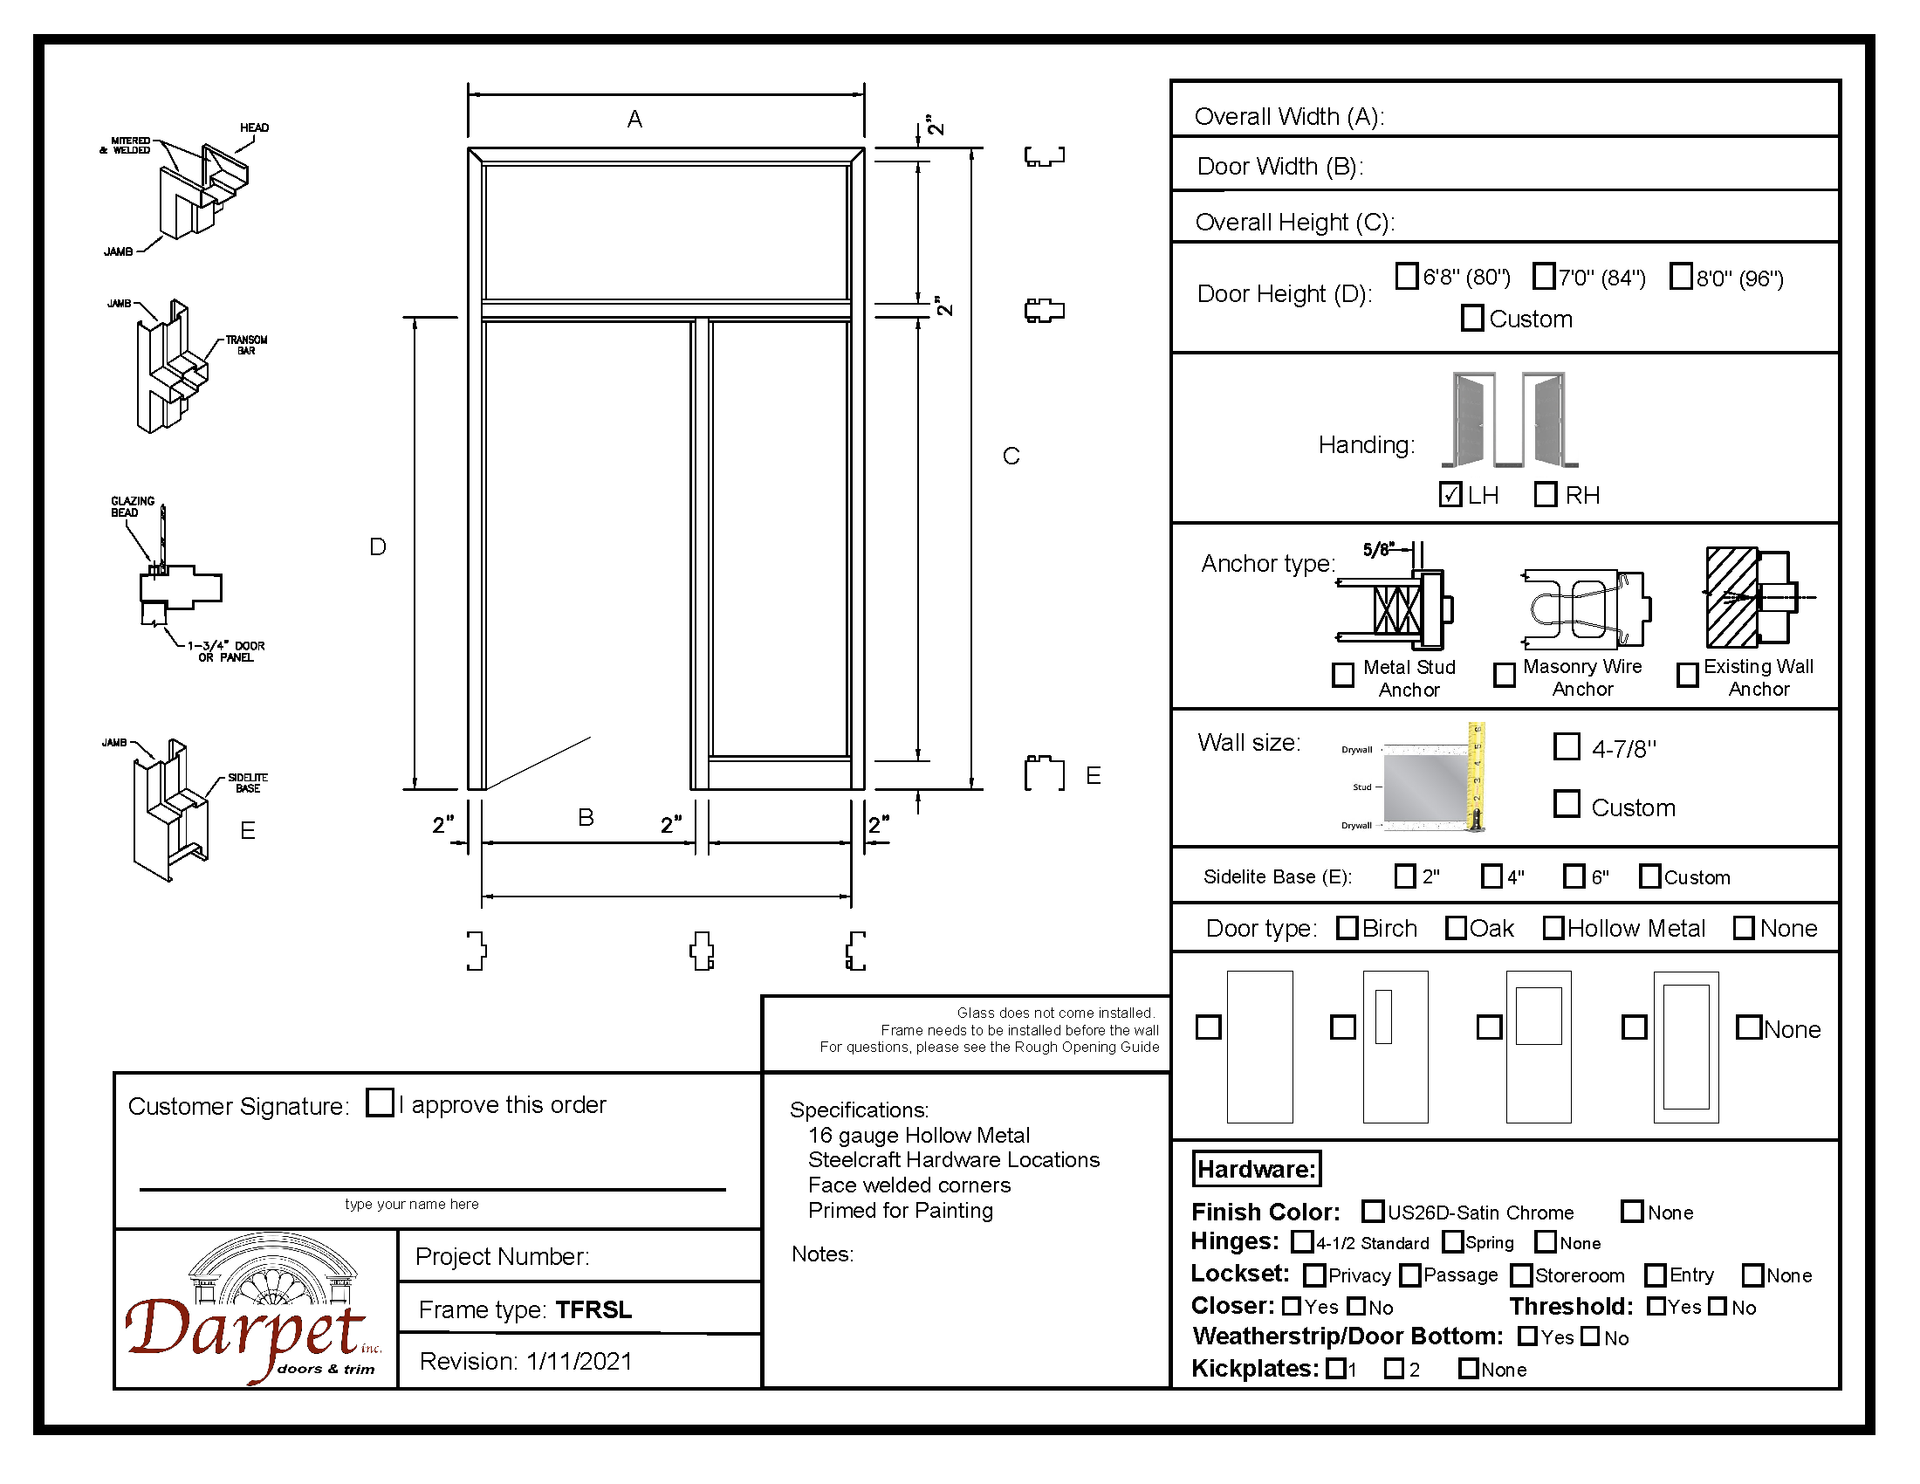 Transom with Right Side Lite Frame - Model#TFRSL